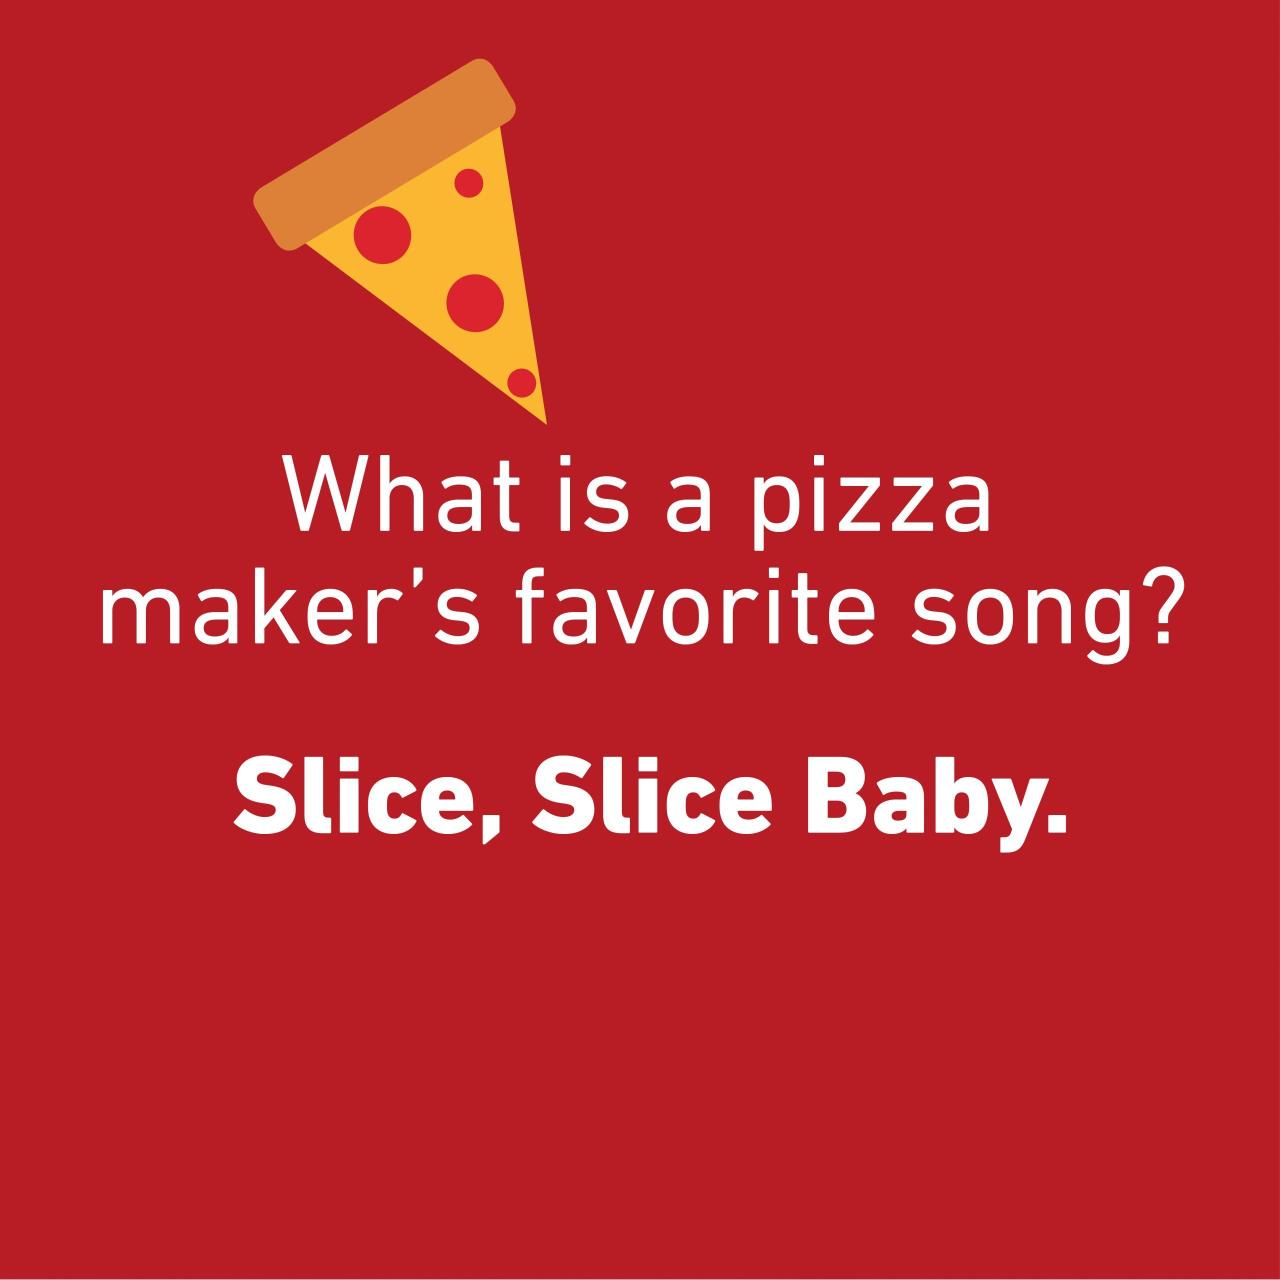 Pizza Funny: 29 Funny Jokes, Puns, Memes and Videos about Pizza - Meyer  Food Blog